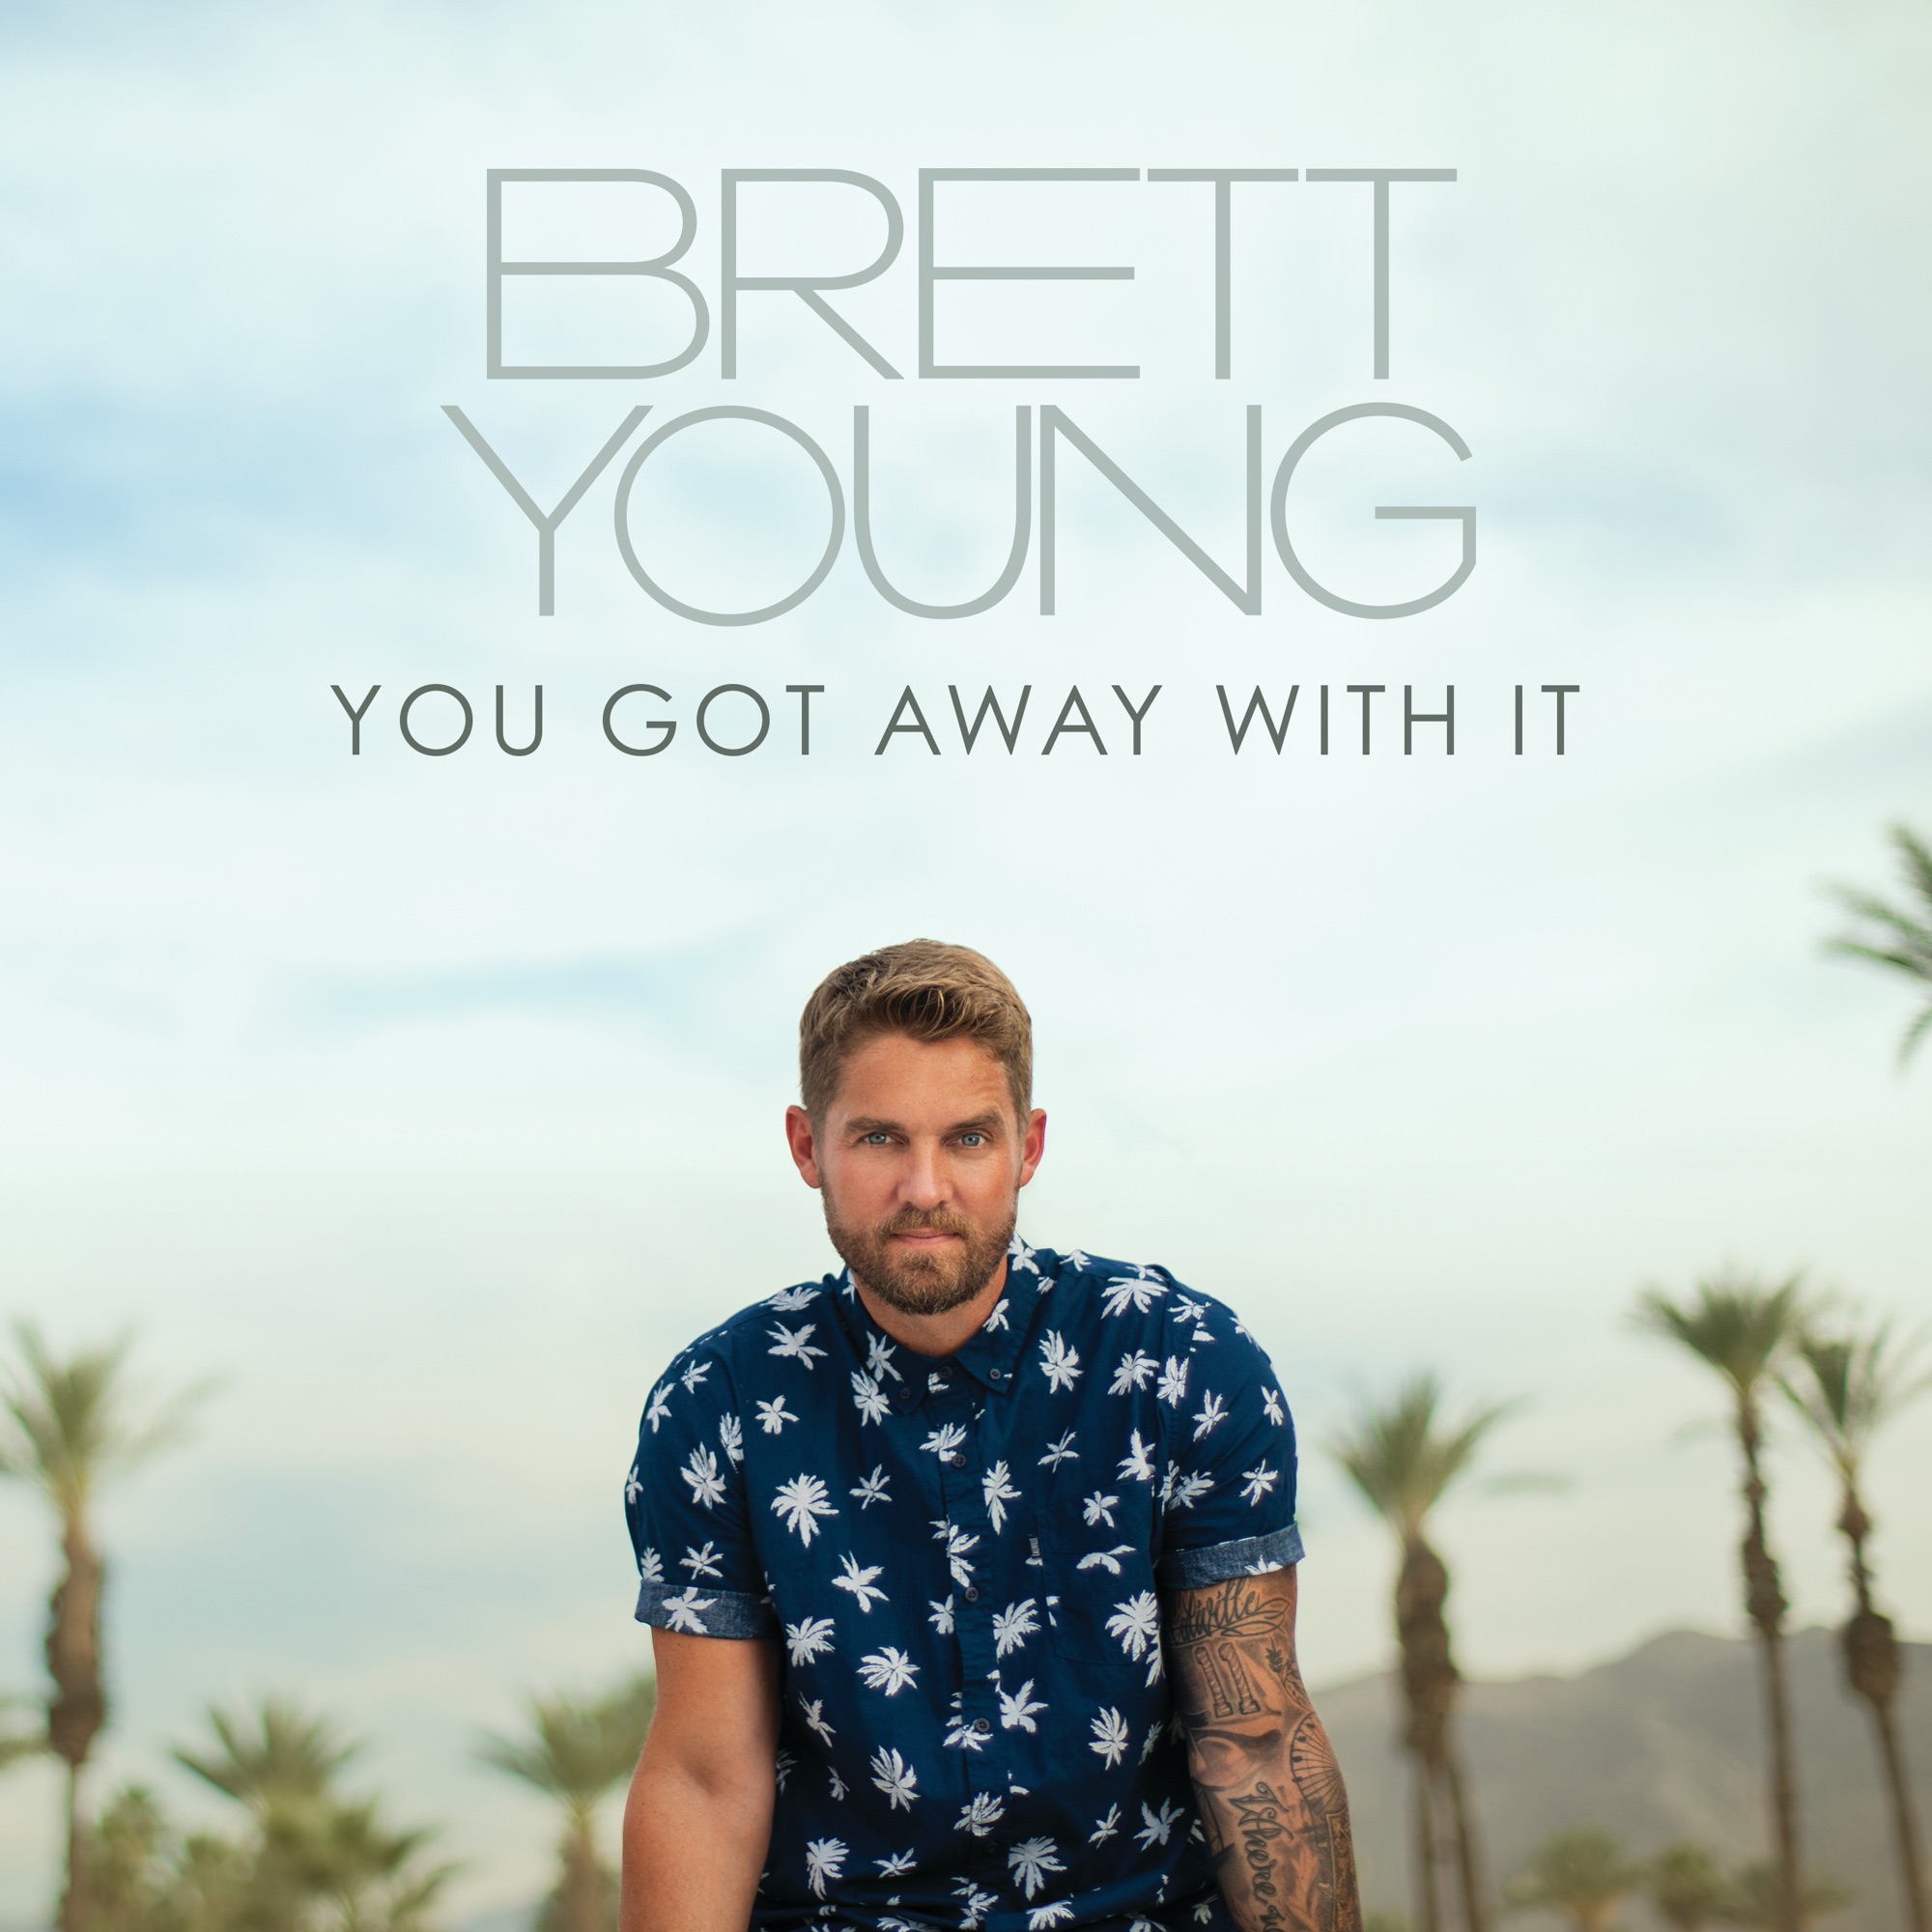 Brett Young - You Got Away With It - Single